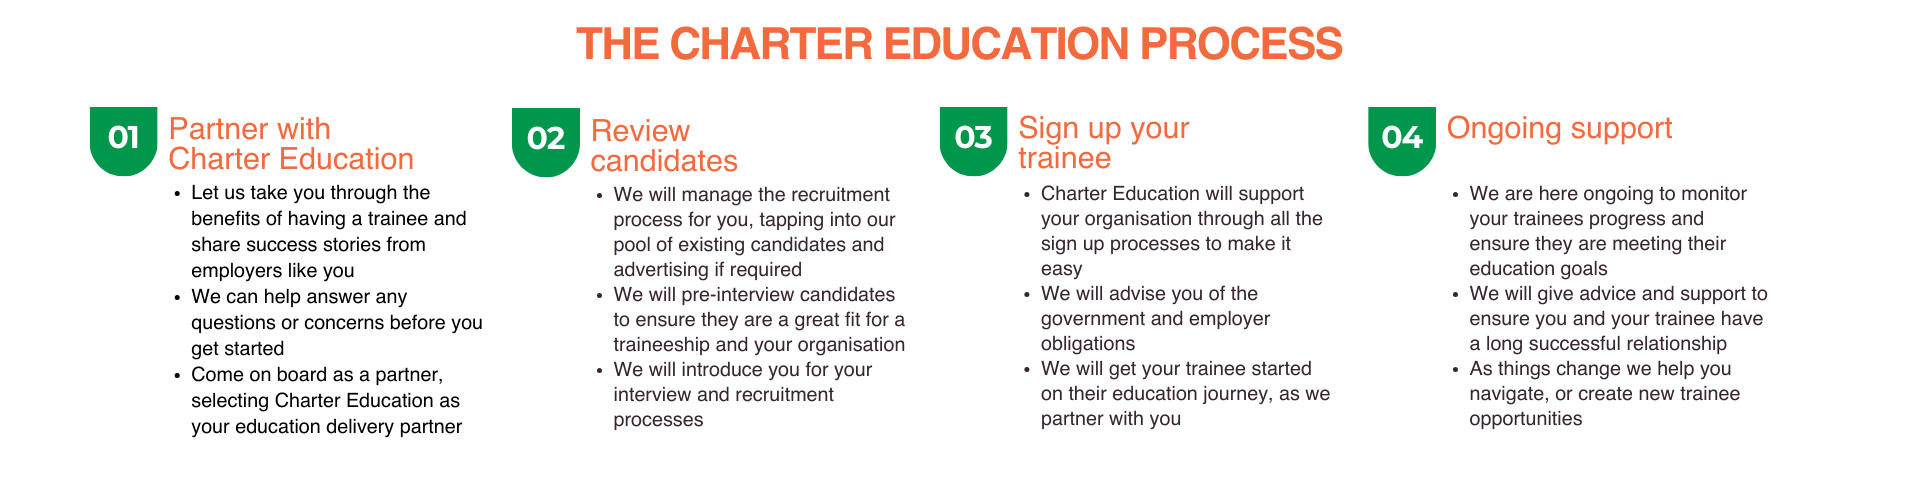 Partner with Charter Education(1)